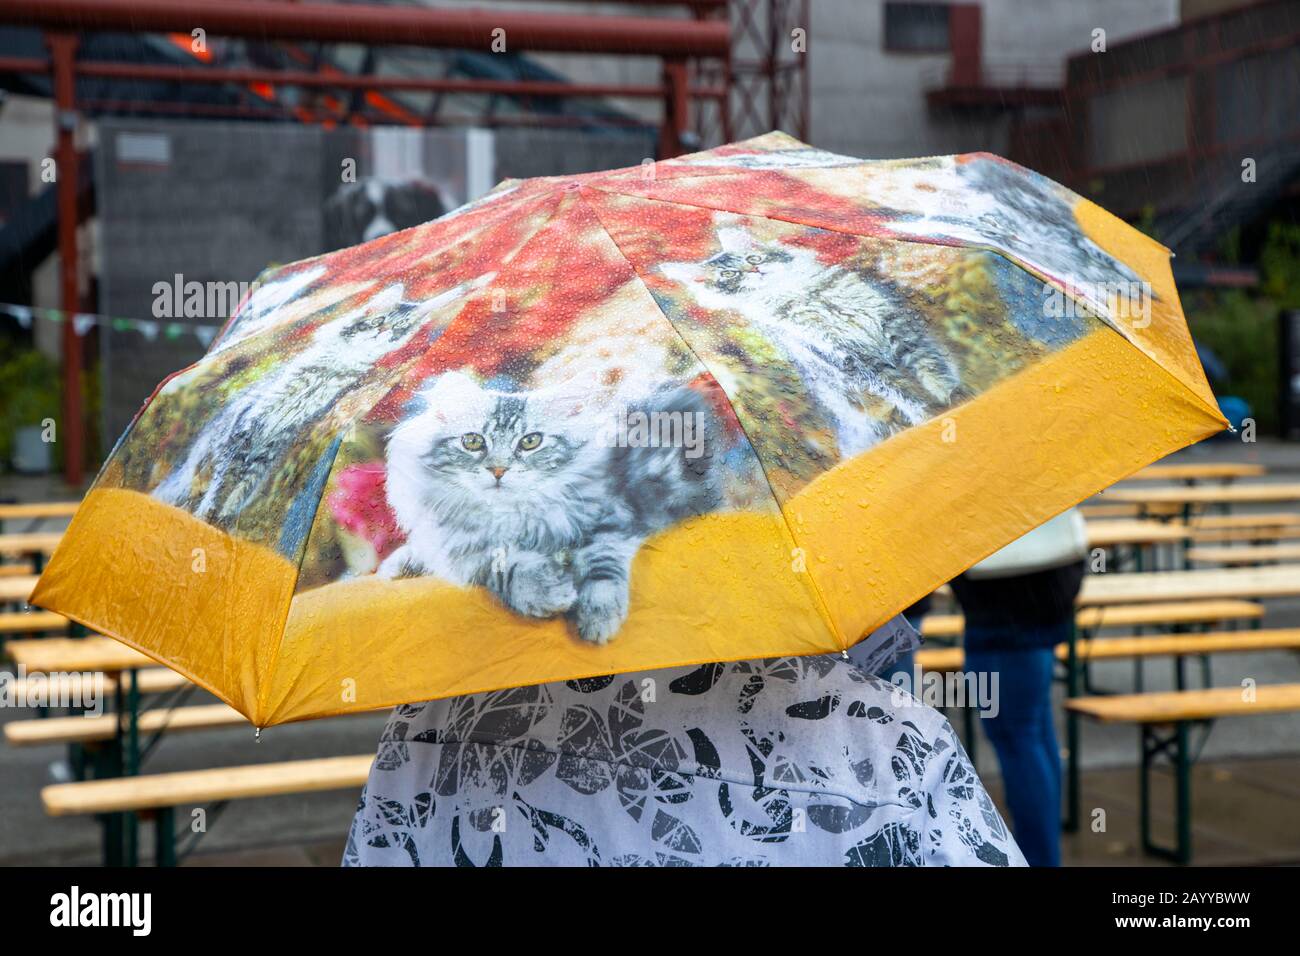 Woman with an umbrella with cat motives, Stock Photo